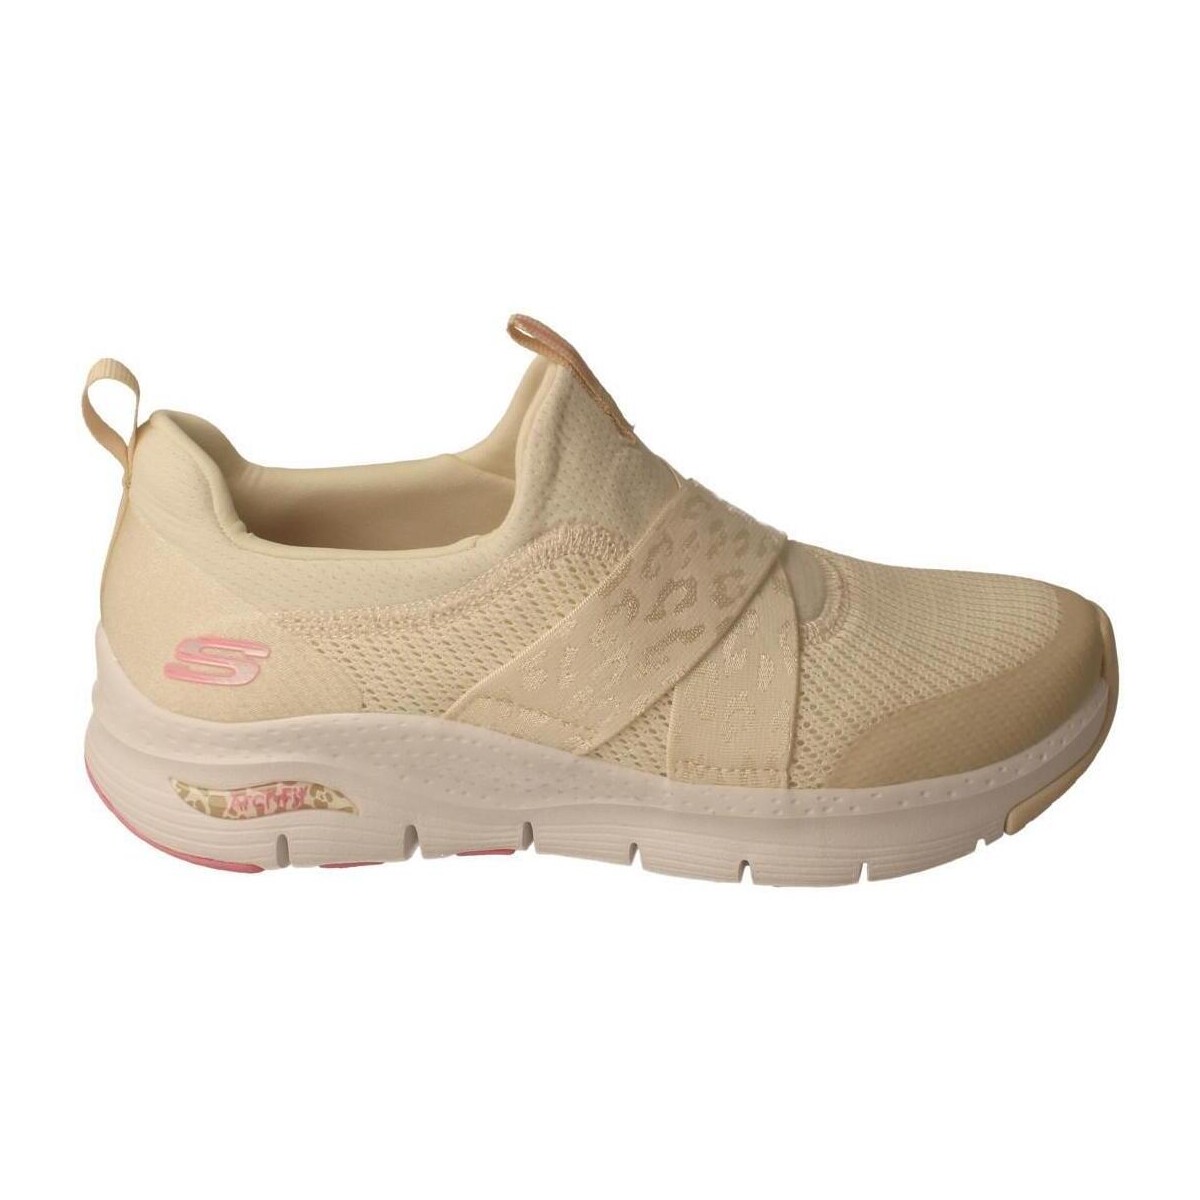 Sapatos Mulher Sapatilhas Skechers  Bege